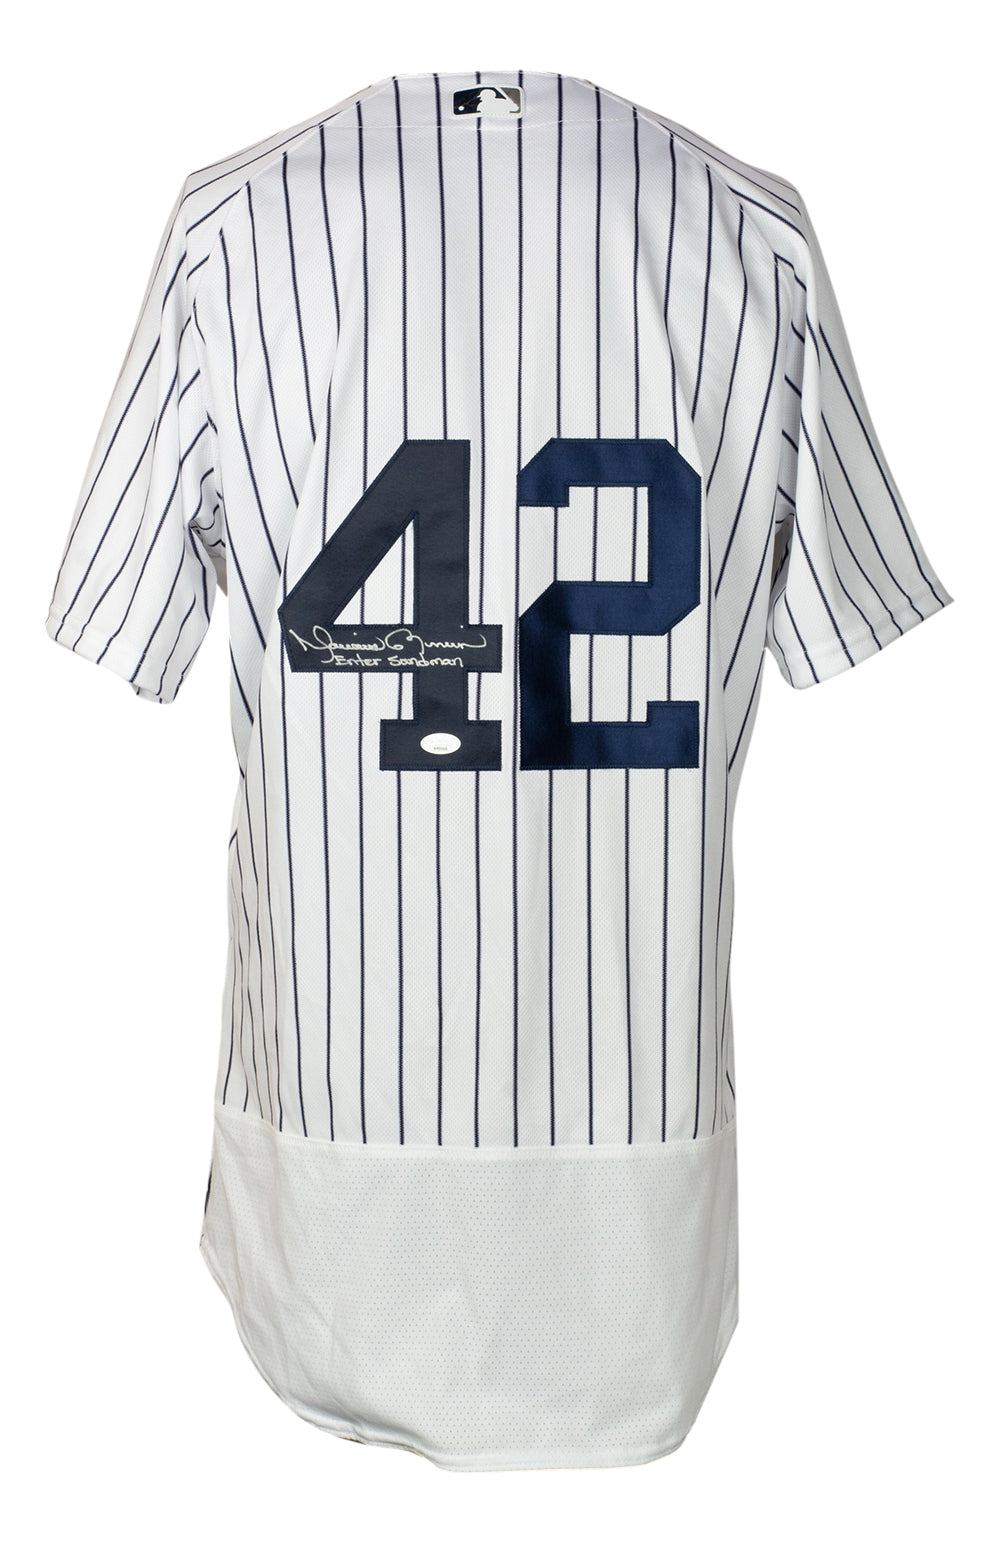 Official New York Yankees Authentic Jerseys, Yankees Flex Base